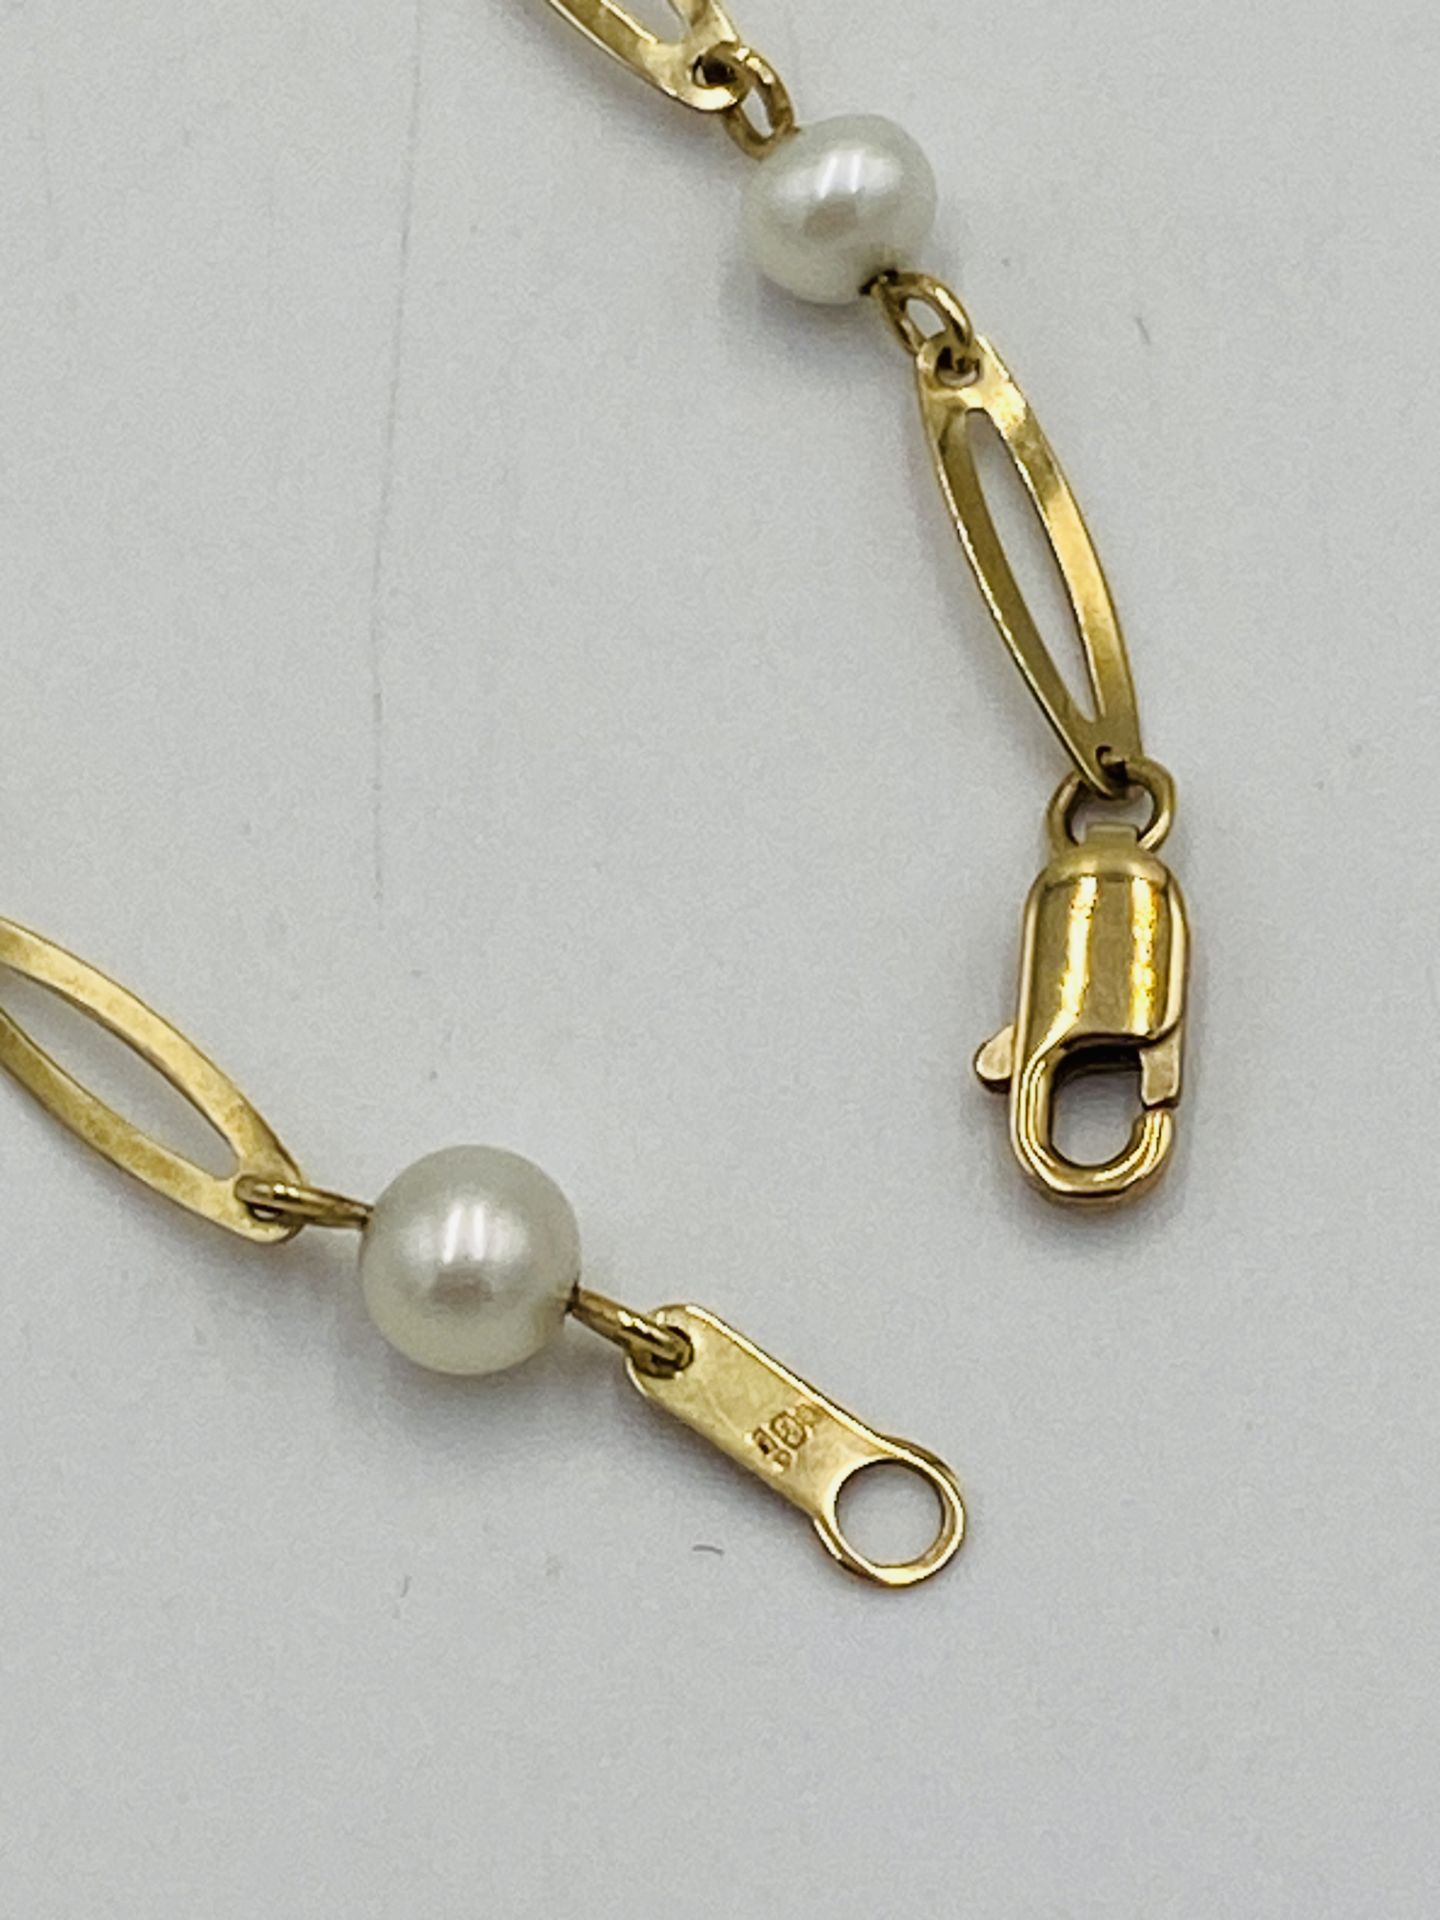 9ct gold and pearl bracelet - Image 2 of 5